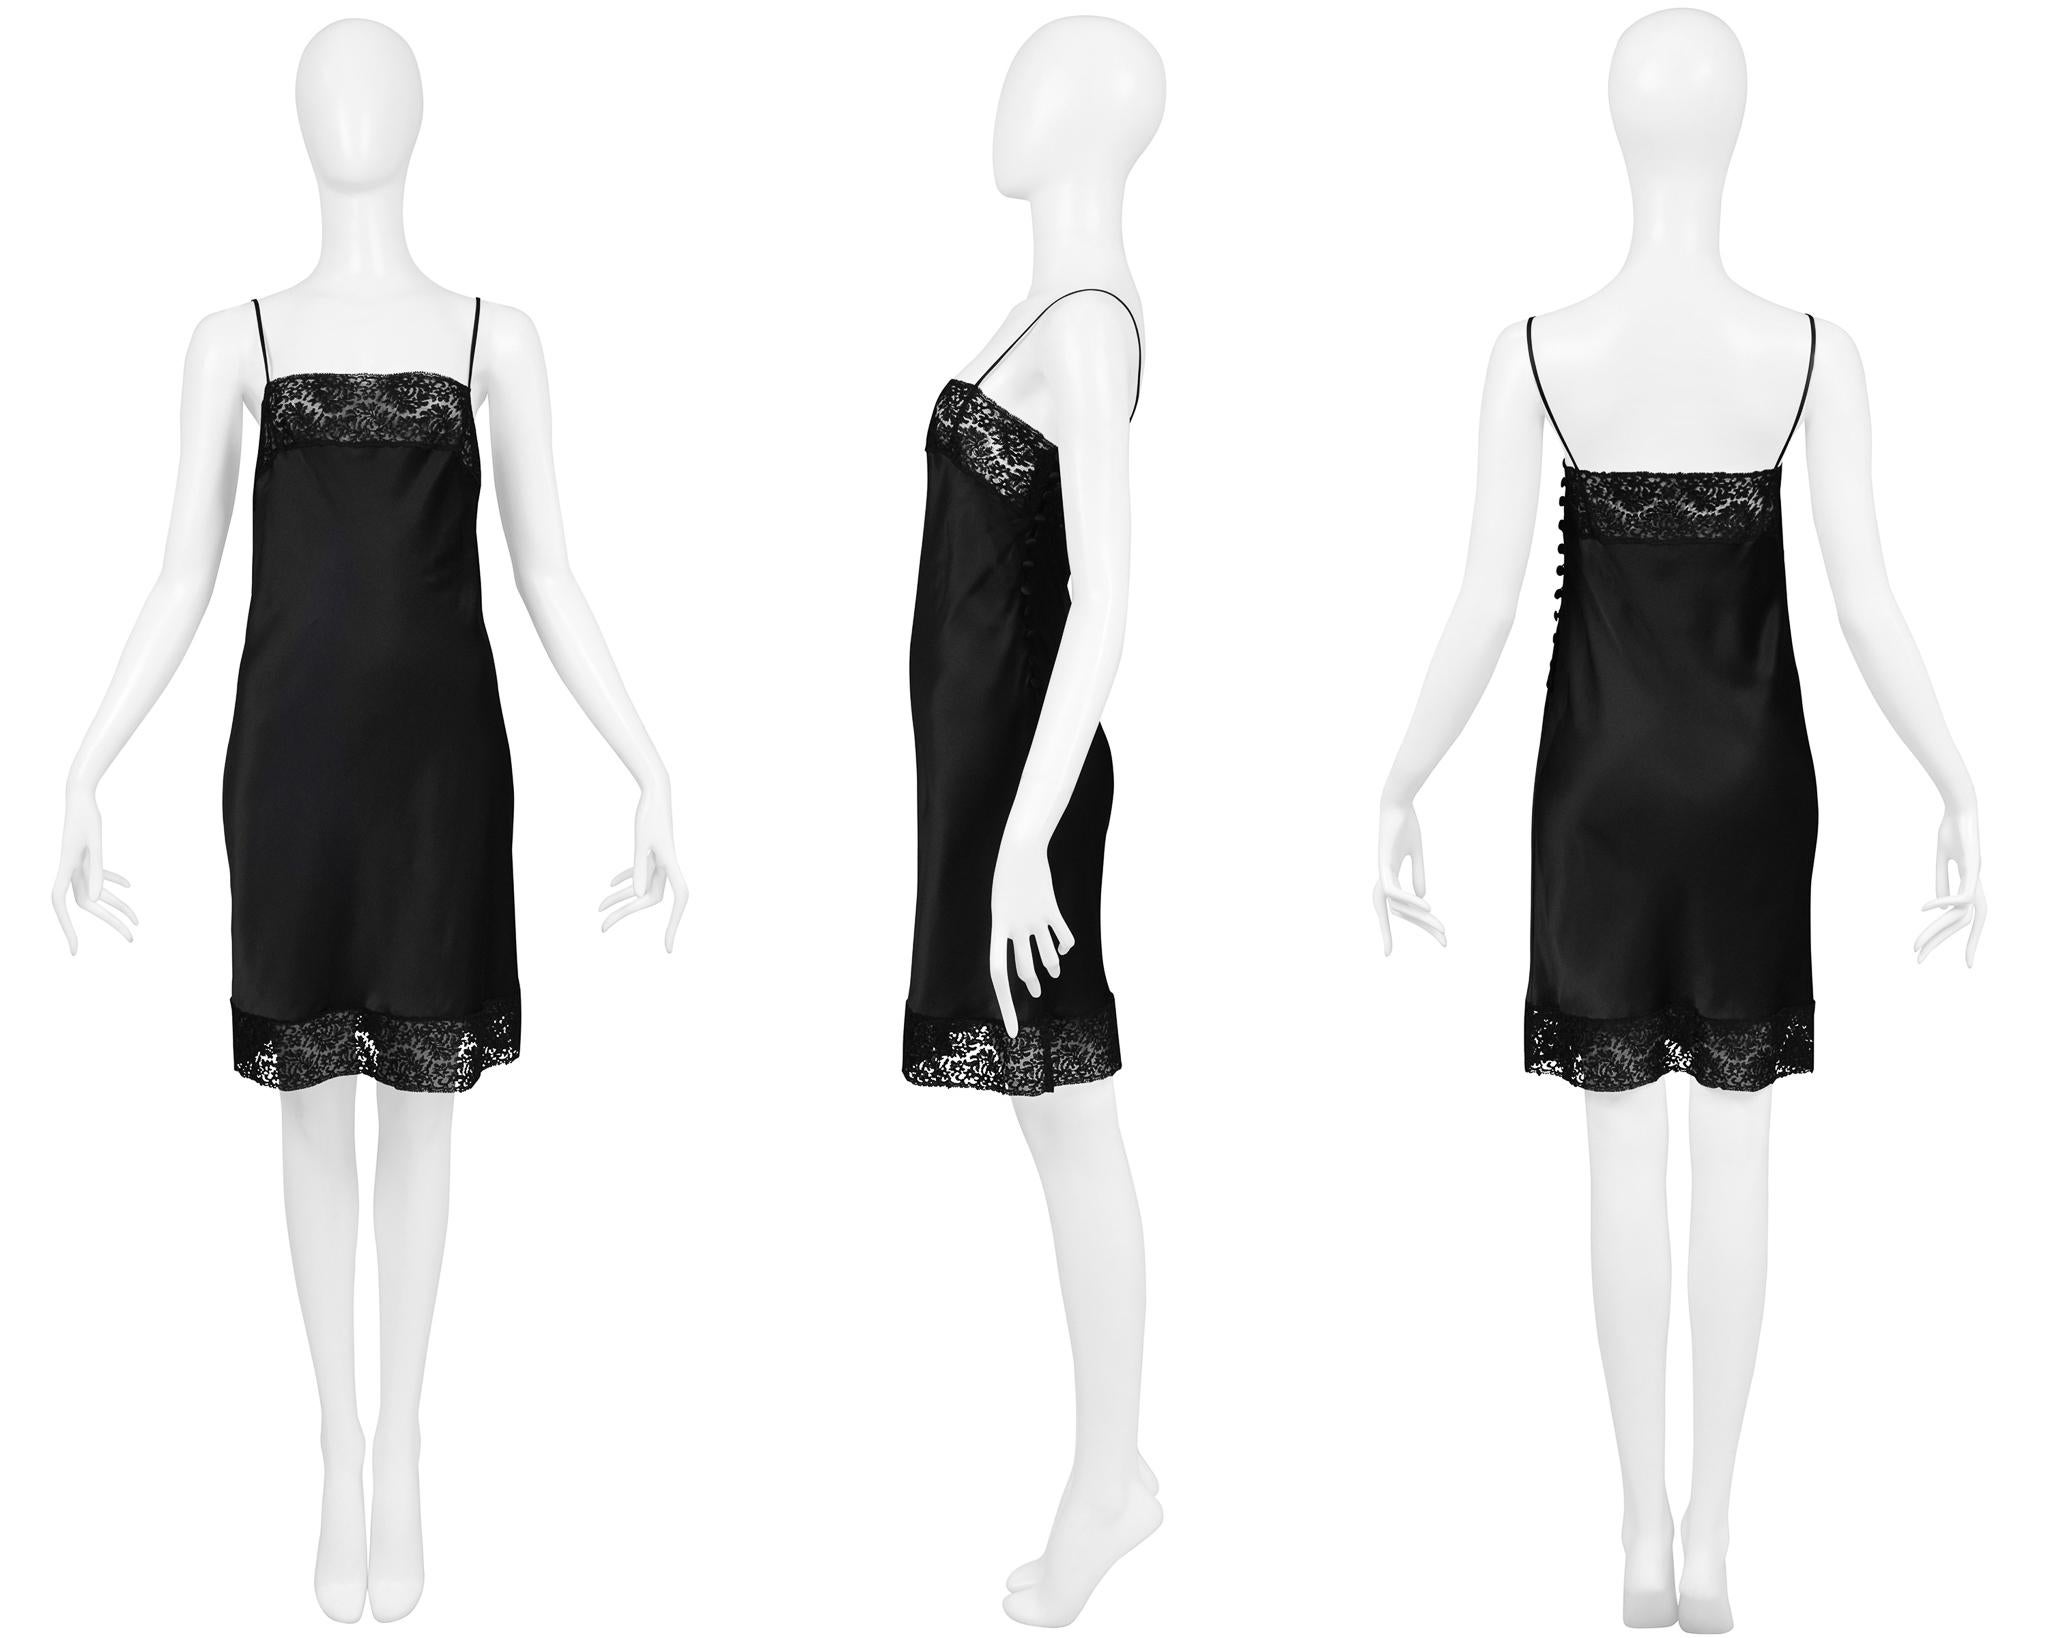 Christian Dior By John Galliano Black Silk And Lace Slip Dress 1997 In Good Condition For Sale In Los Angeles, CA